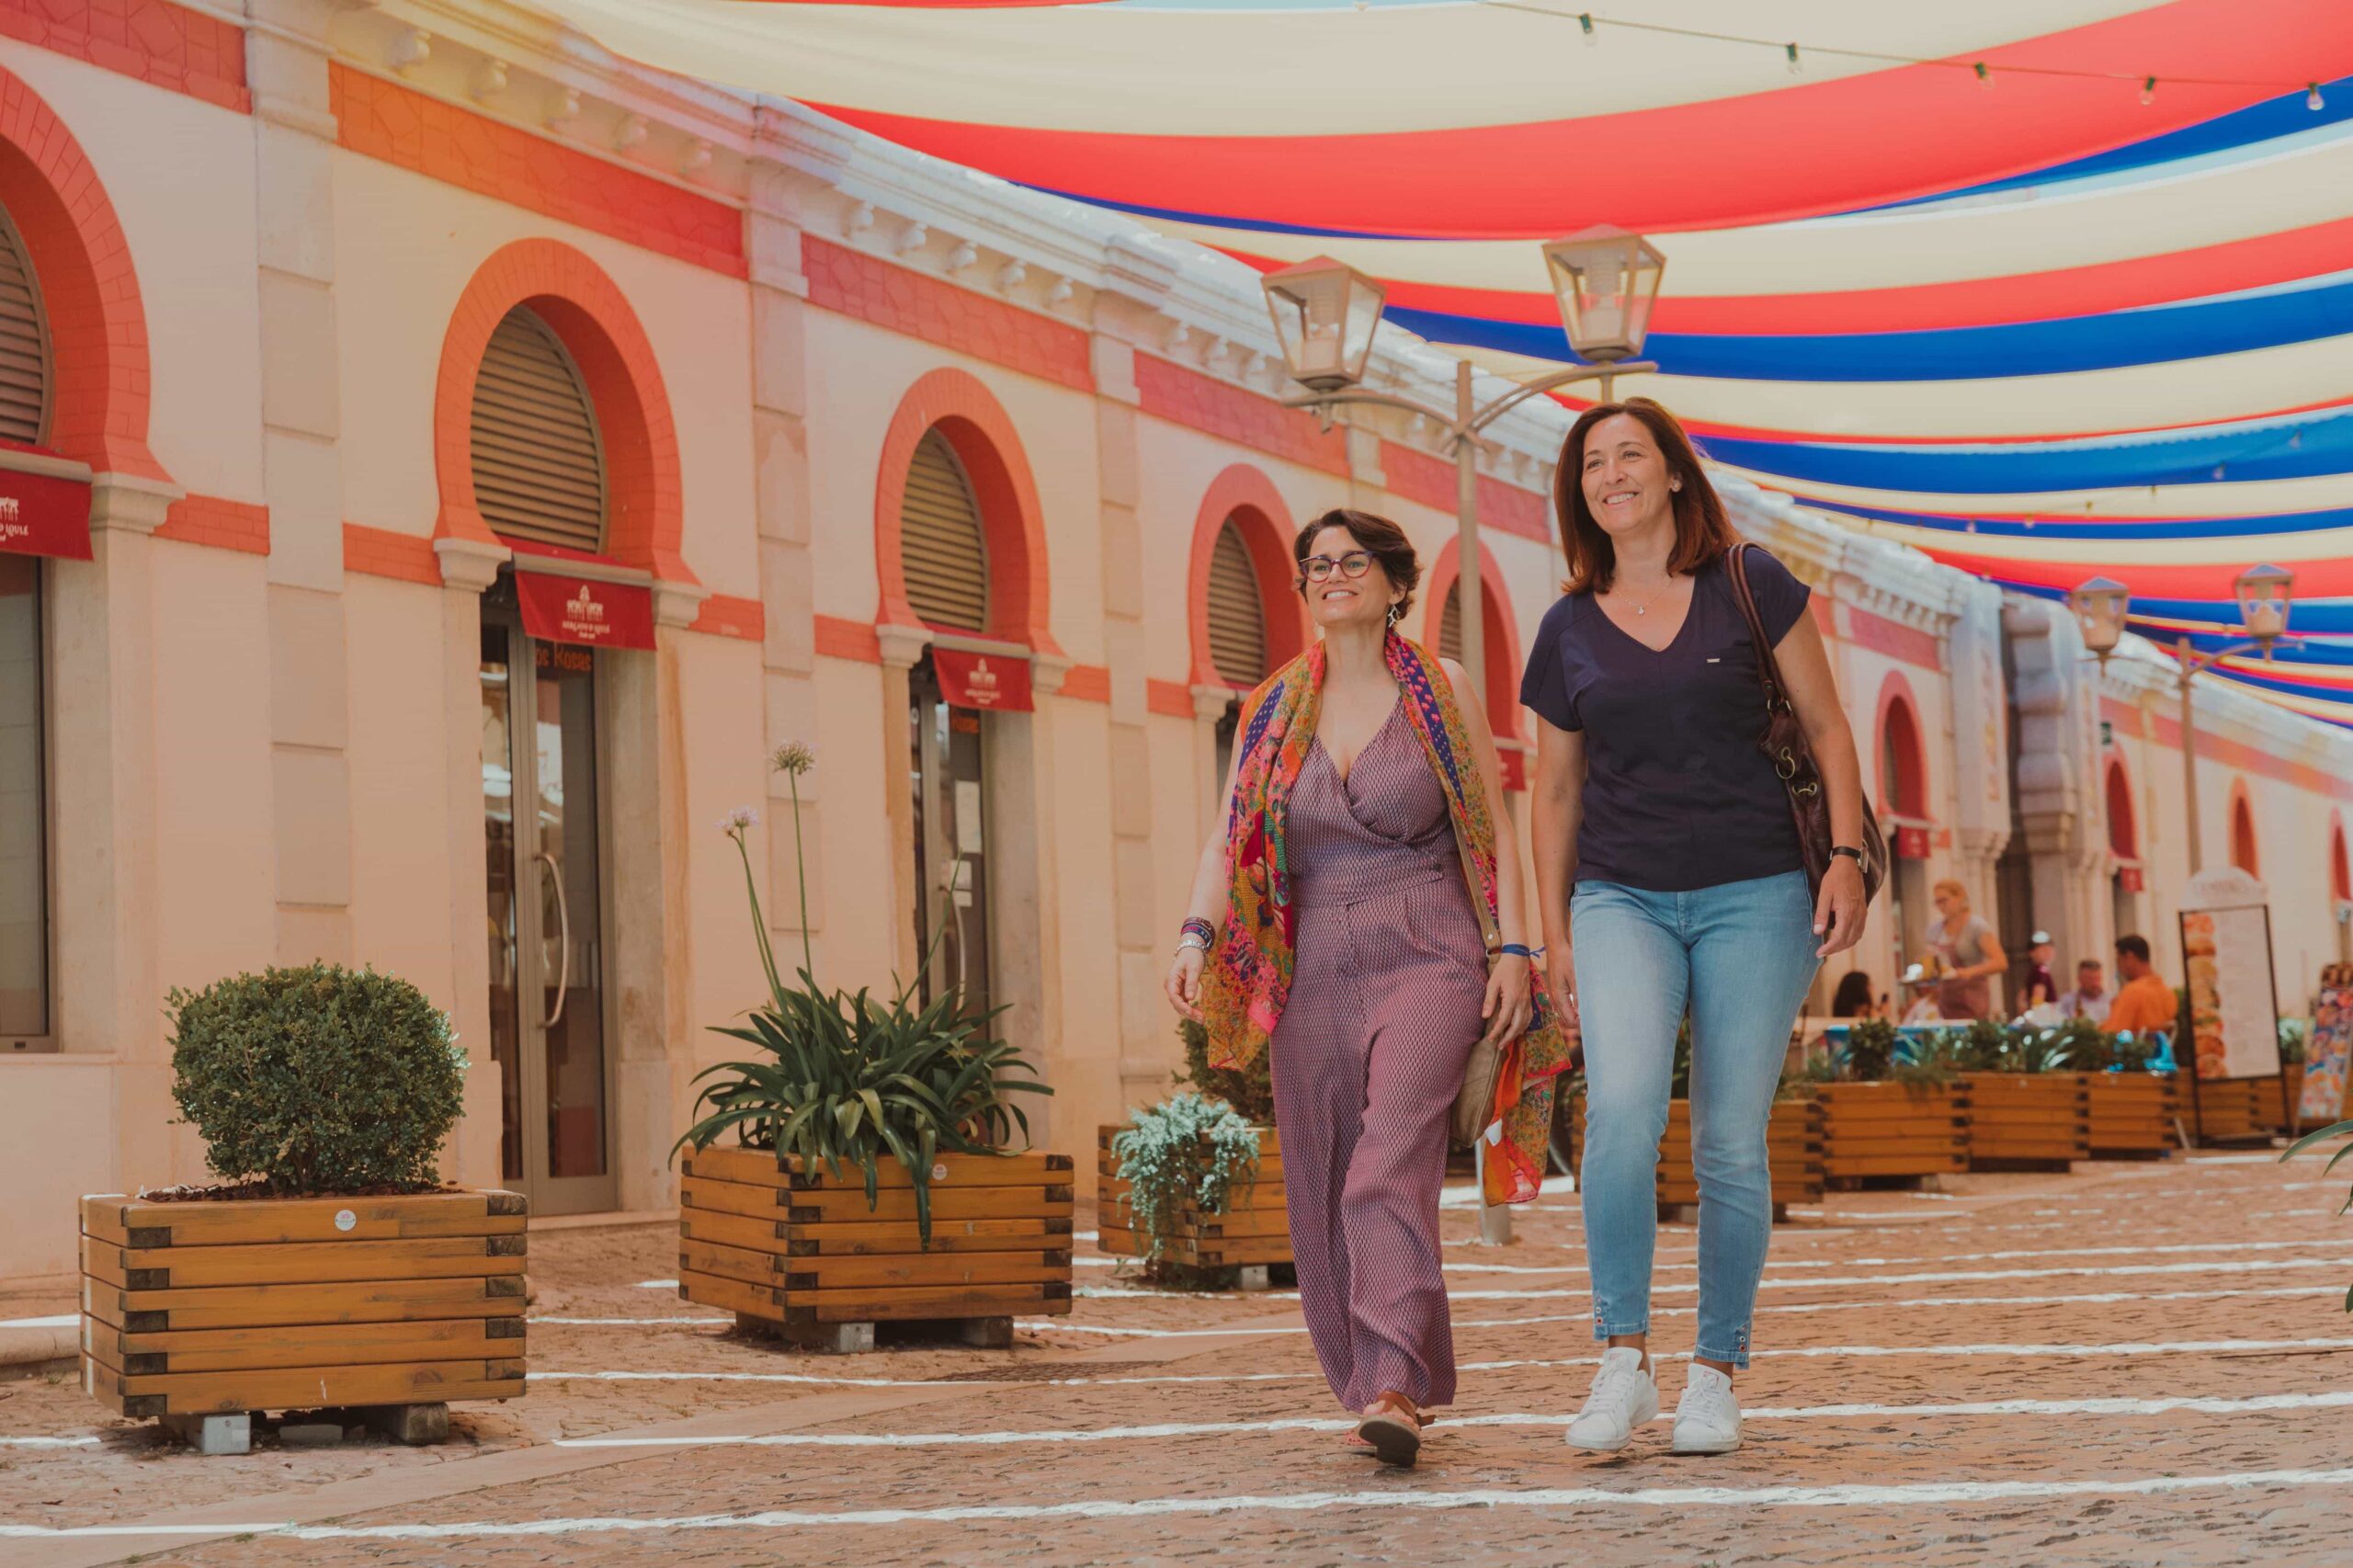 Proudly Portugal campaign with a lesbian couple in the Loulé market